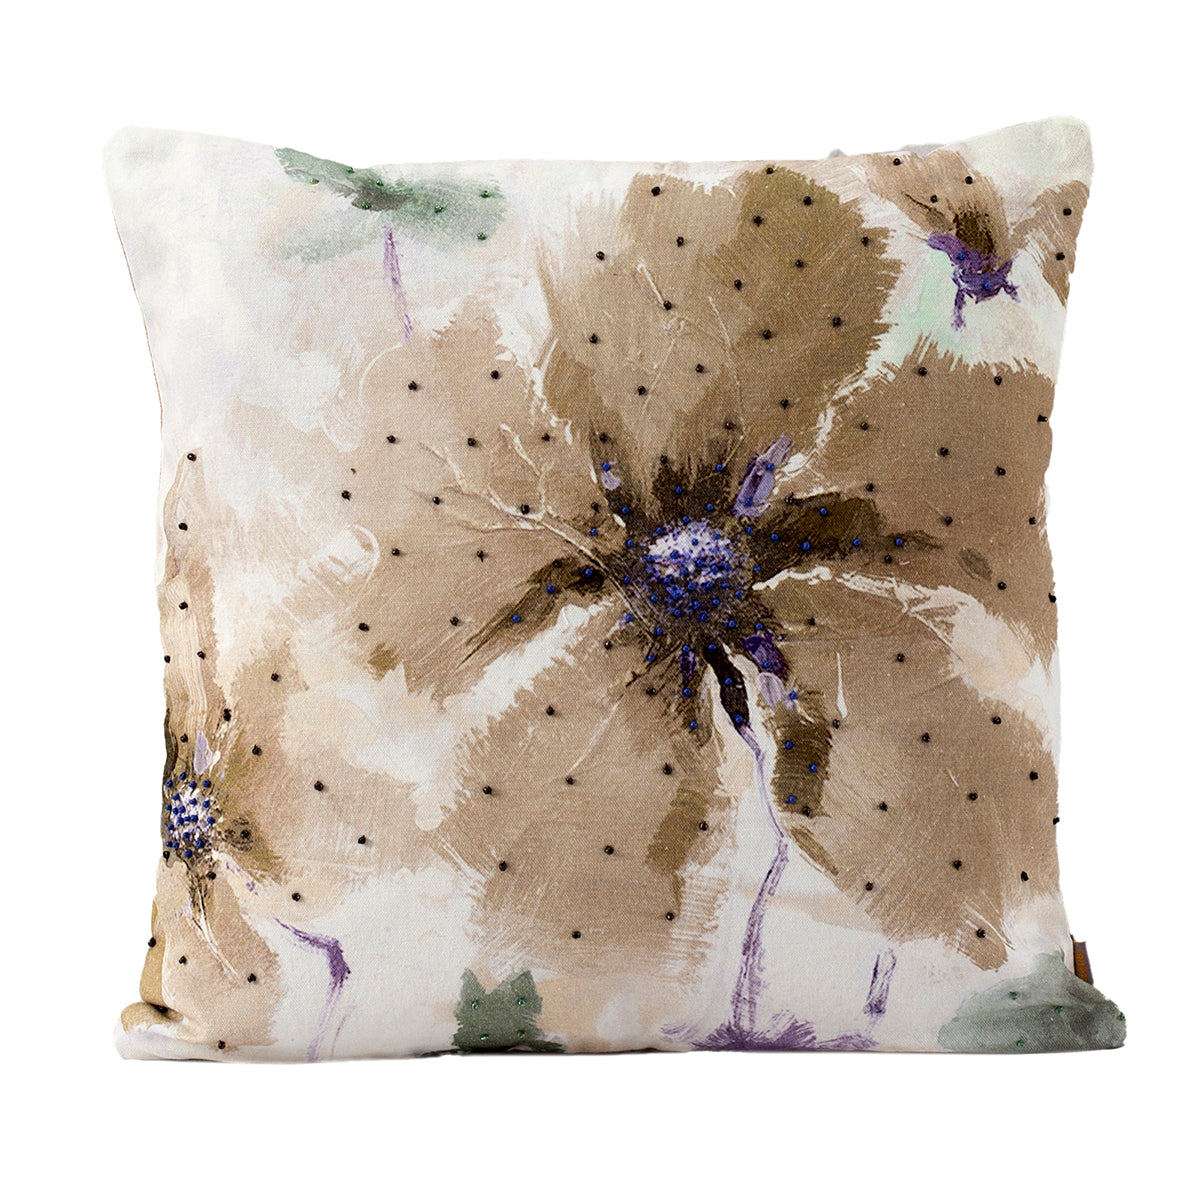 Rurban Divine Exotica Digital Printed and Hand Embroidered 100% Cotton Neutral Cushion Cover